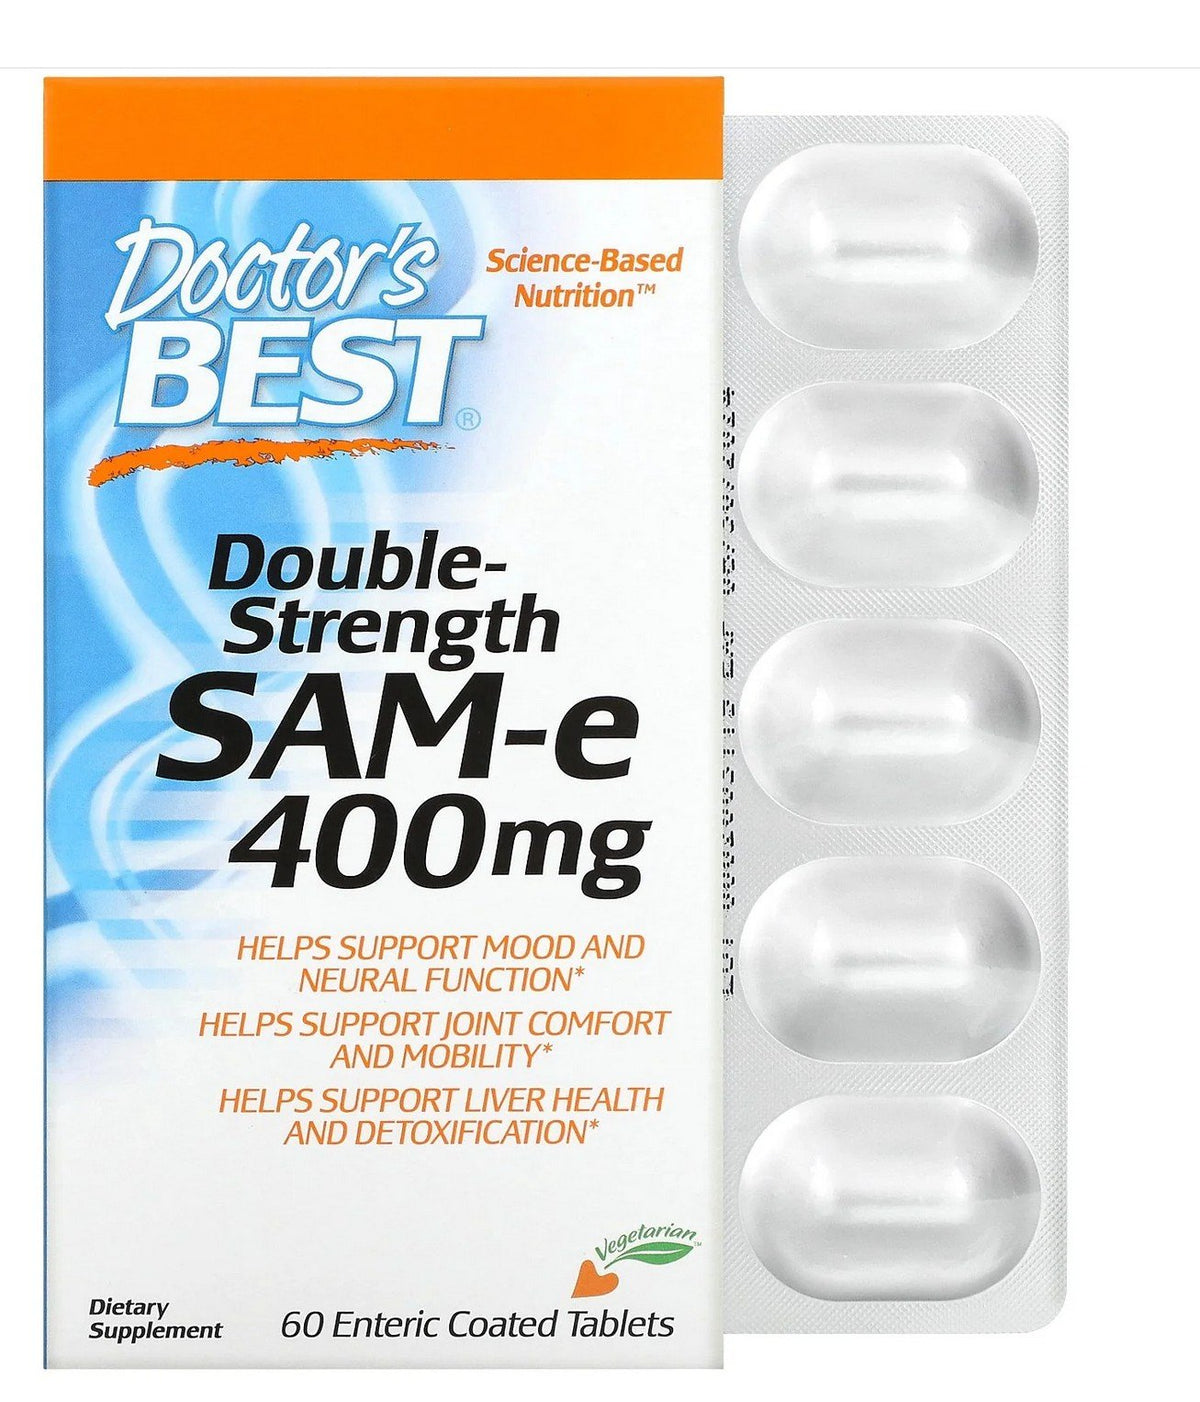 Doctors Best SAMe 400mg Double-Strength 60 Tablet